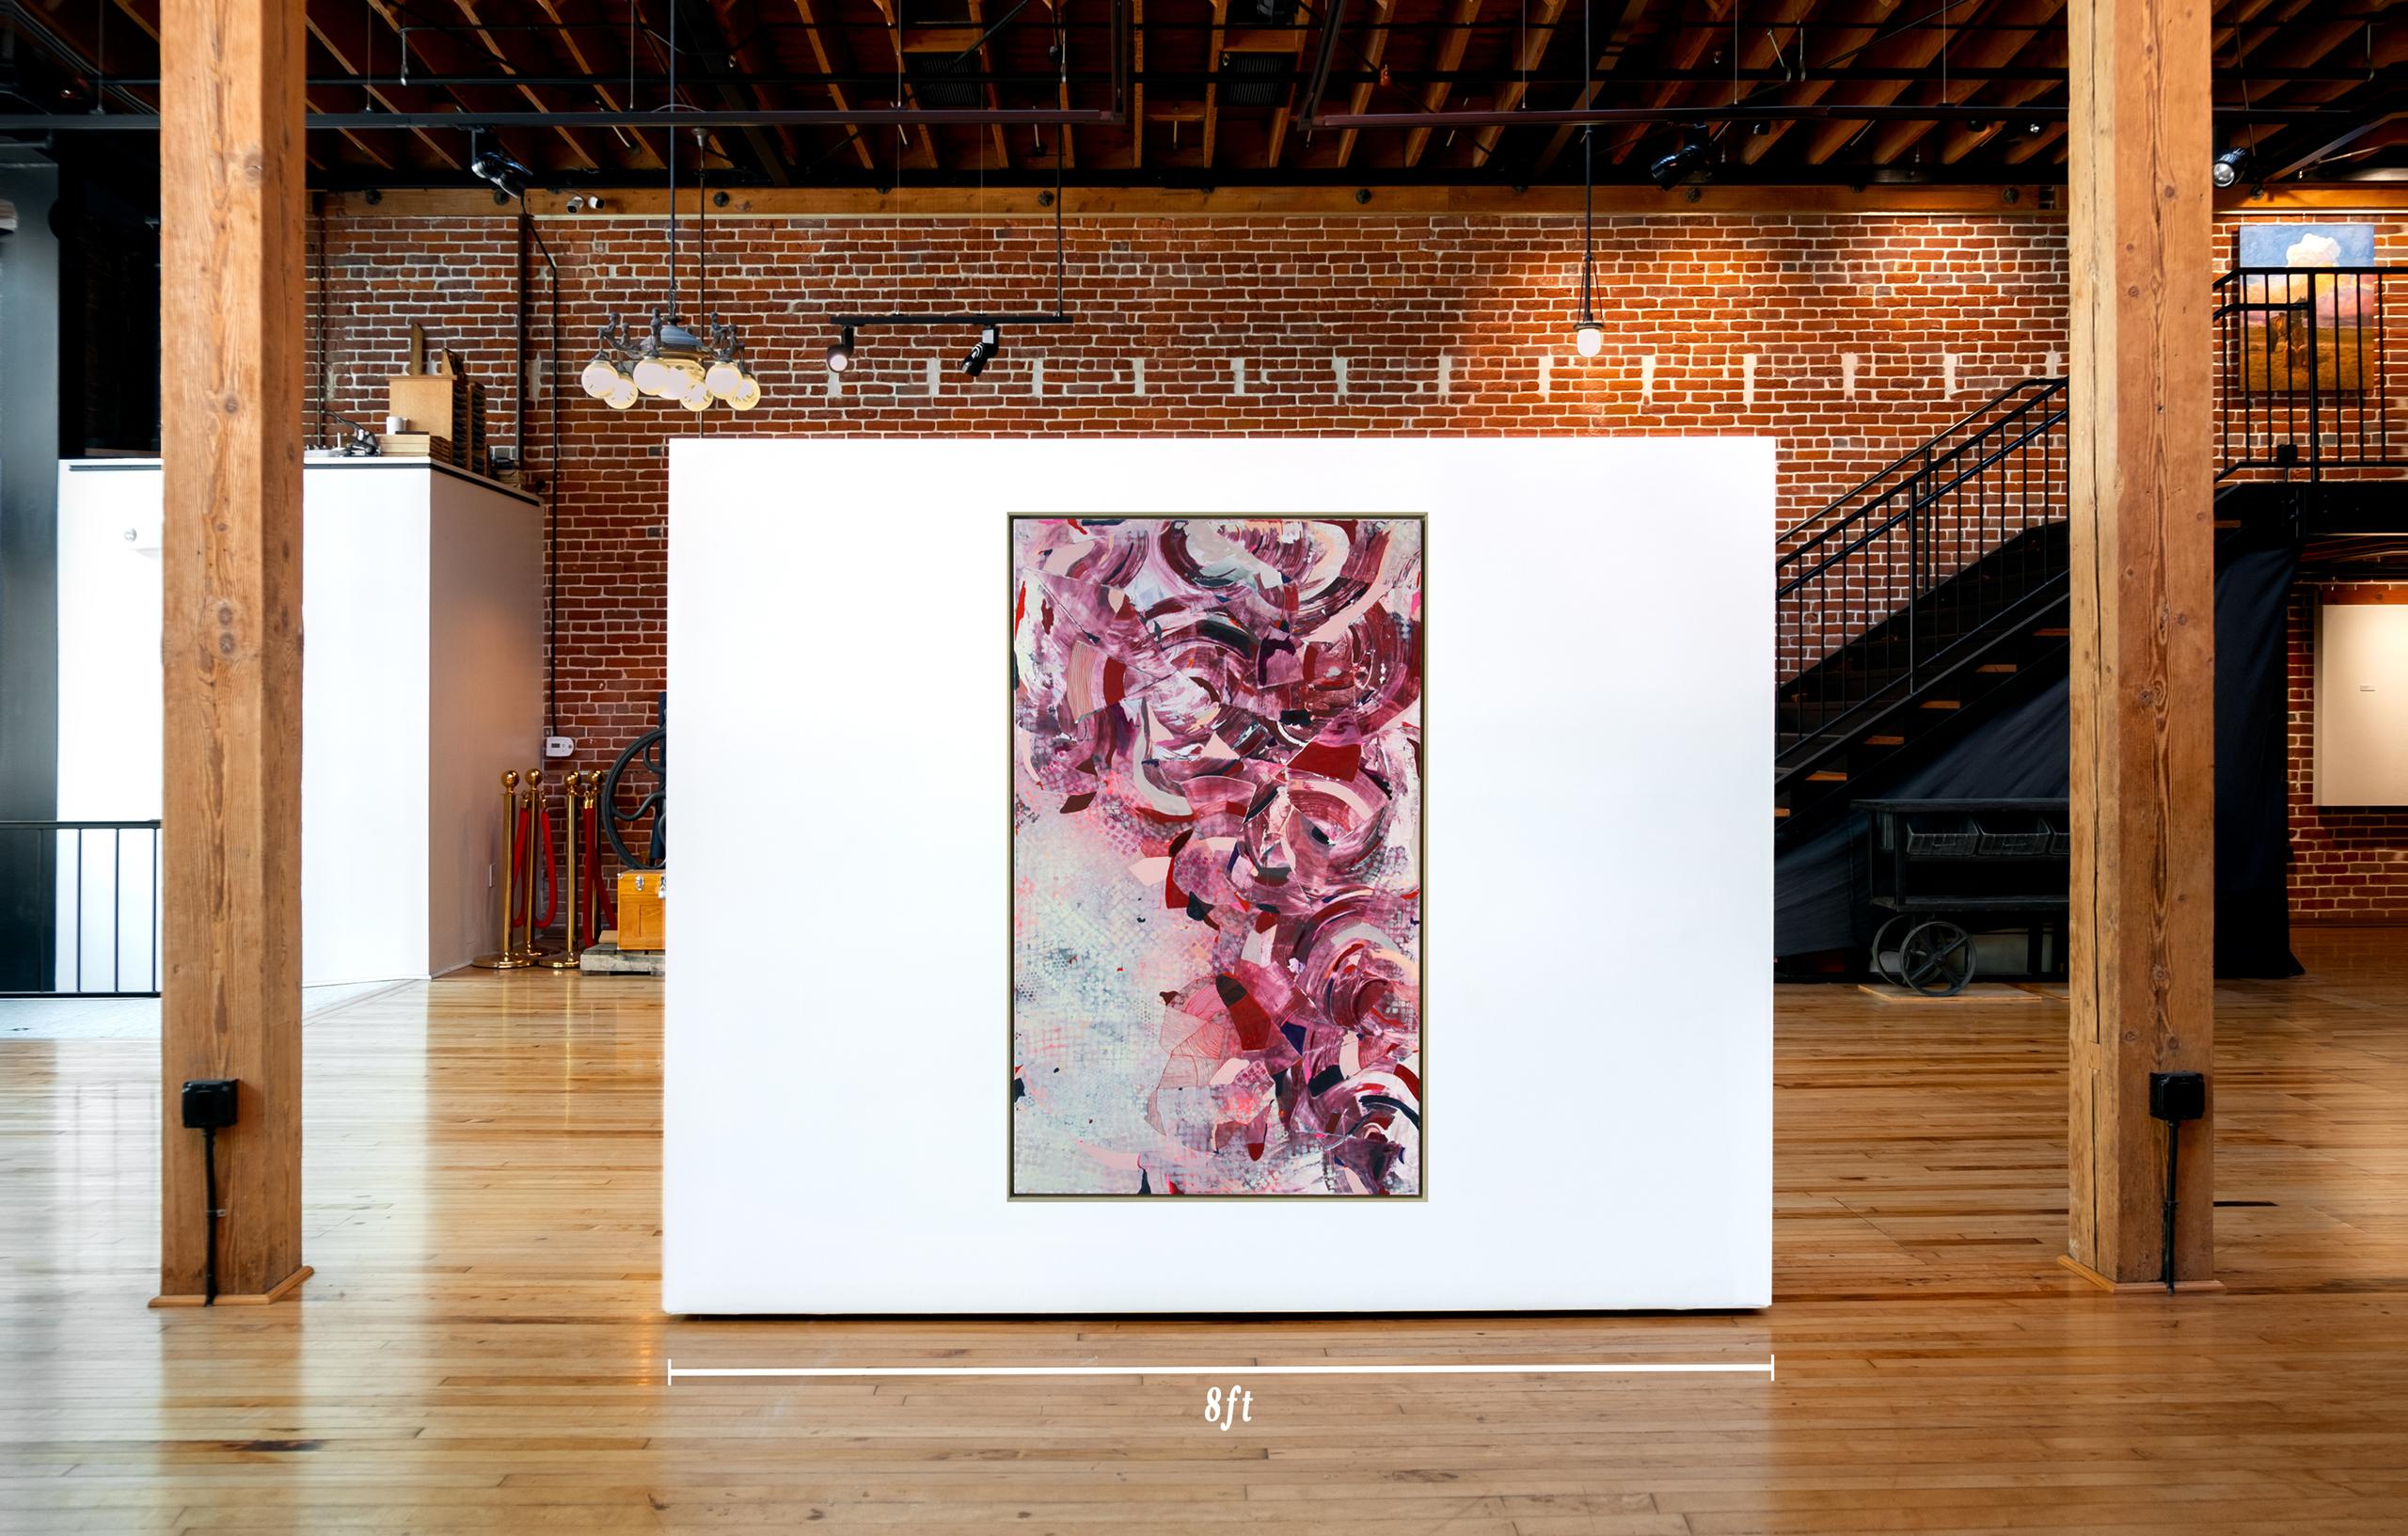 This is a one of a kind original abstract expressionist painting by local San Diego artist, Kelsey Overstreet. This painting is 37.5 x 61.75 x 2.5. It comes framed. 

Overstreet uses many shades of pink here creating a spiral like pattern up the